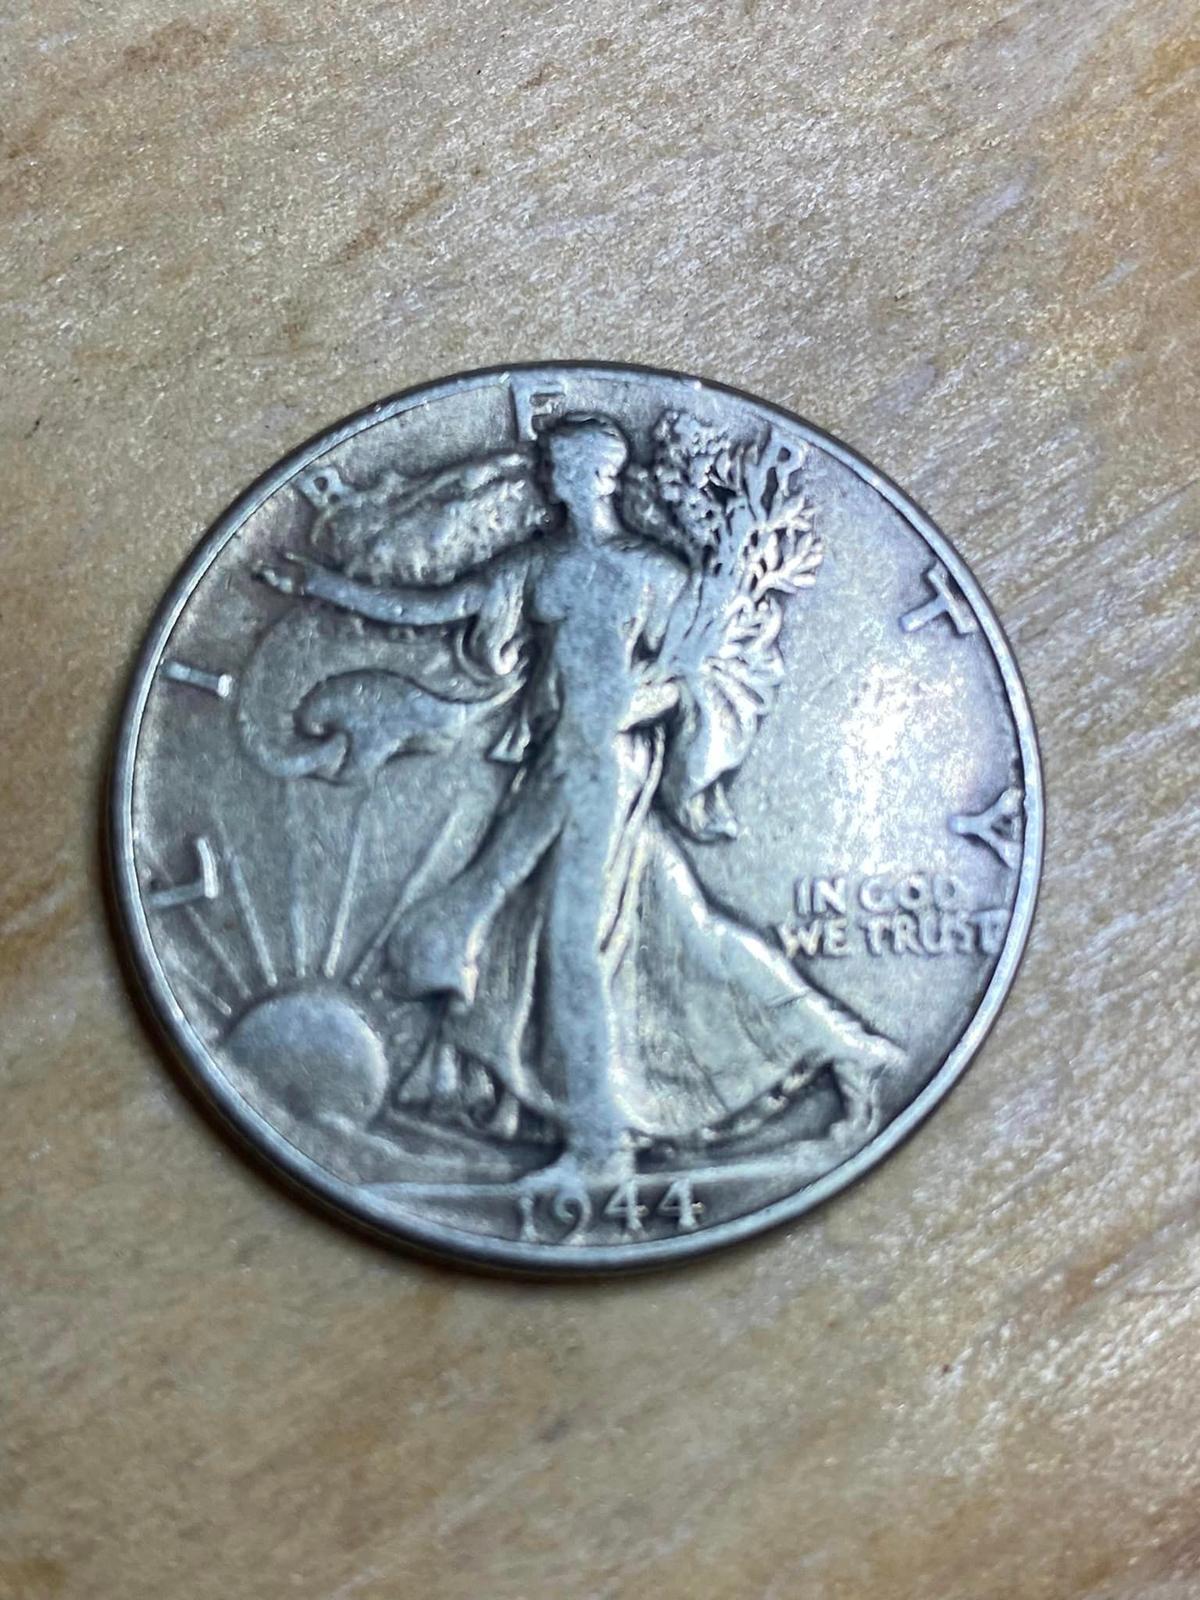 A close-up of a 1944 coin found in the manor. (Courtesy of <a href="https://www.facebook.com/profile.php?id=100076974185503">Krasnesky Manor for Wayward Cats</a>)